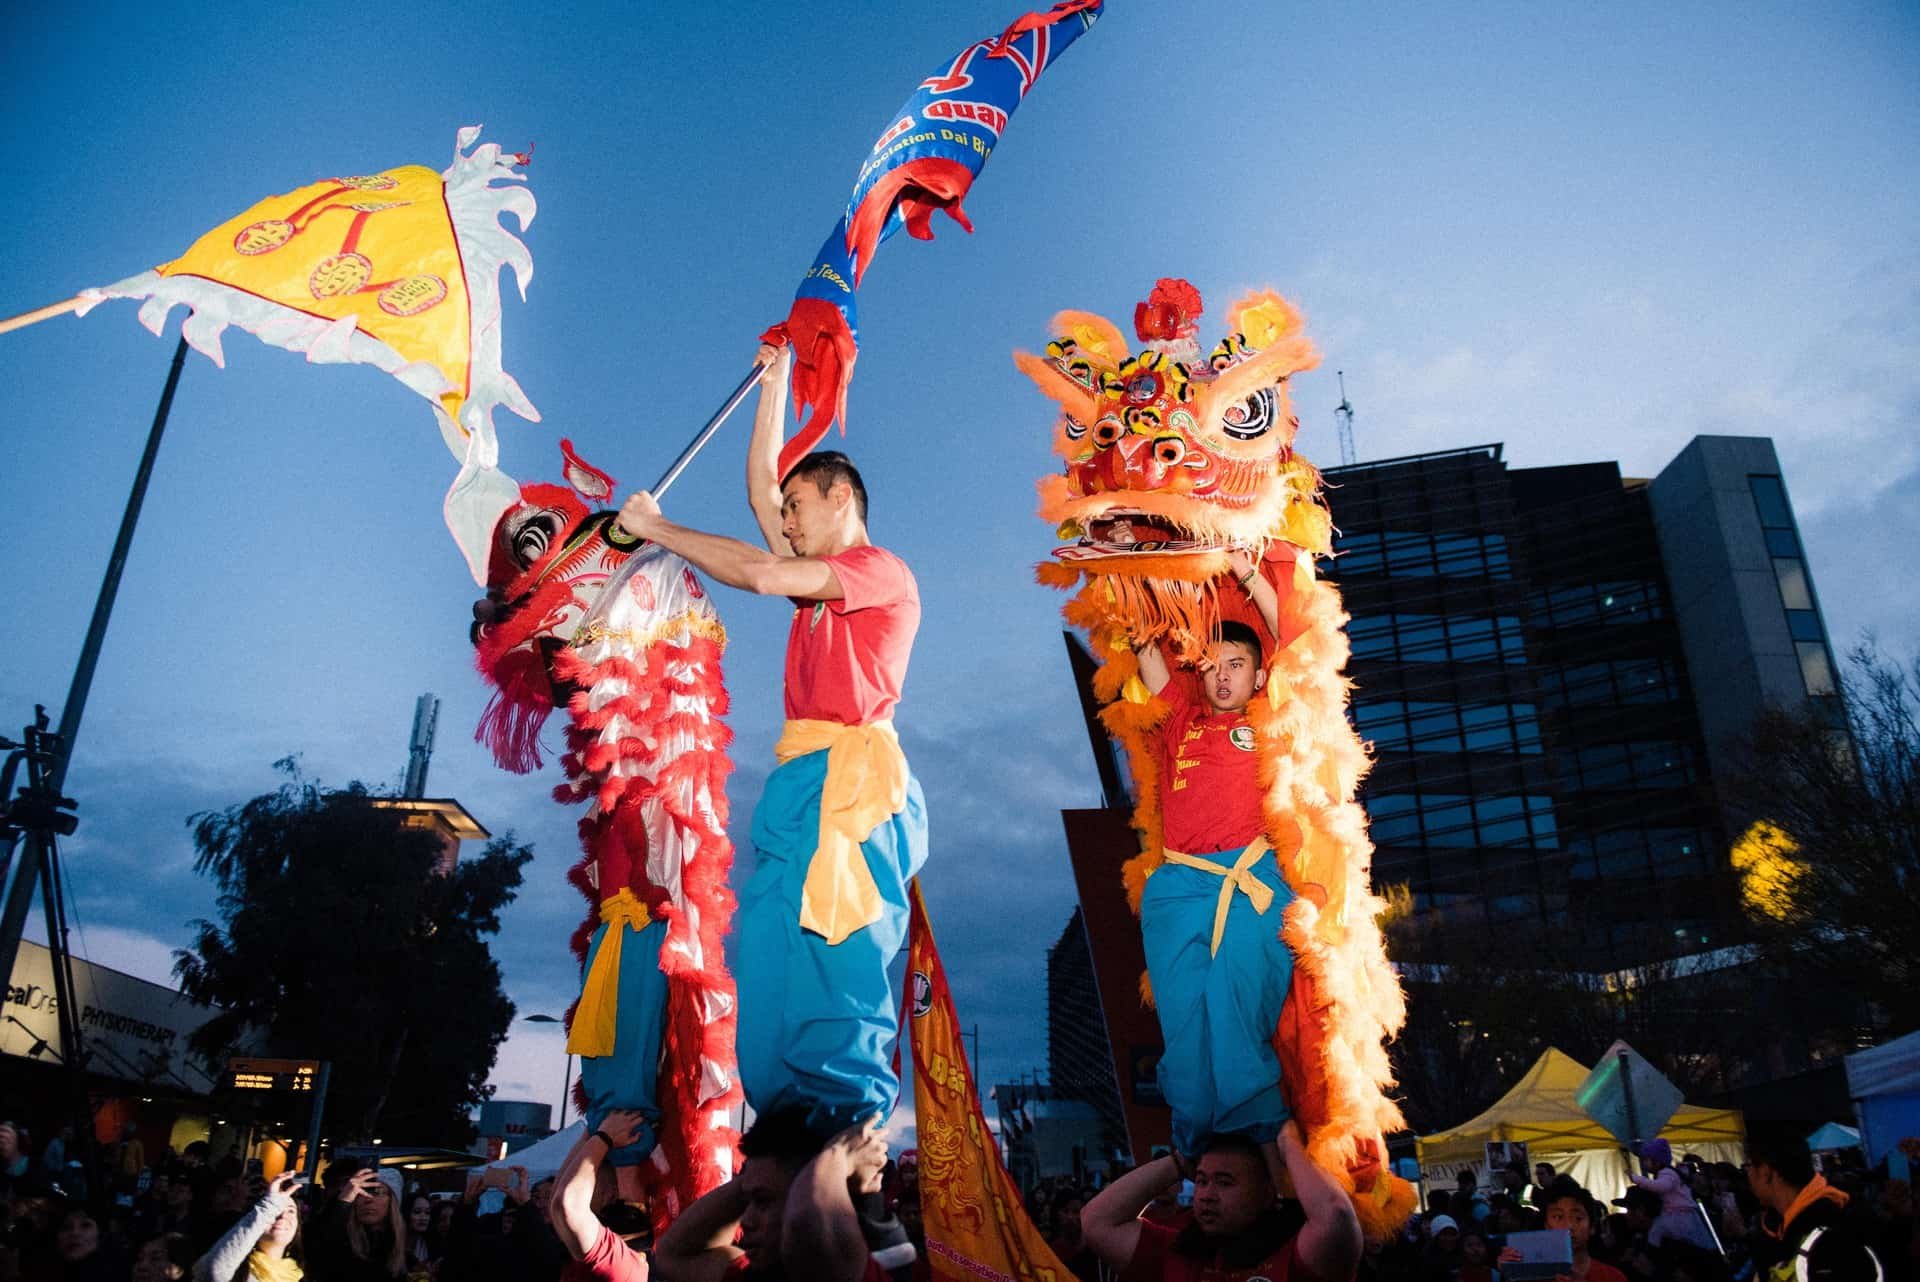 14-facts-about-cultural-festivals-and-events-in-eastvale-california